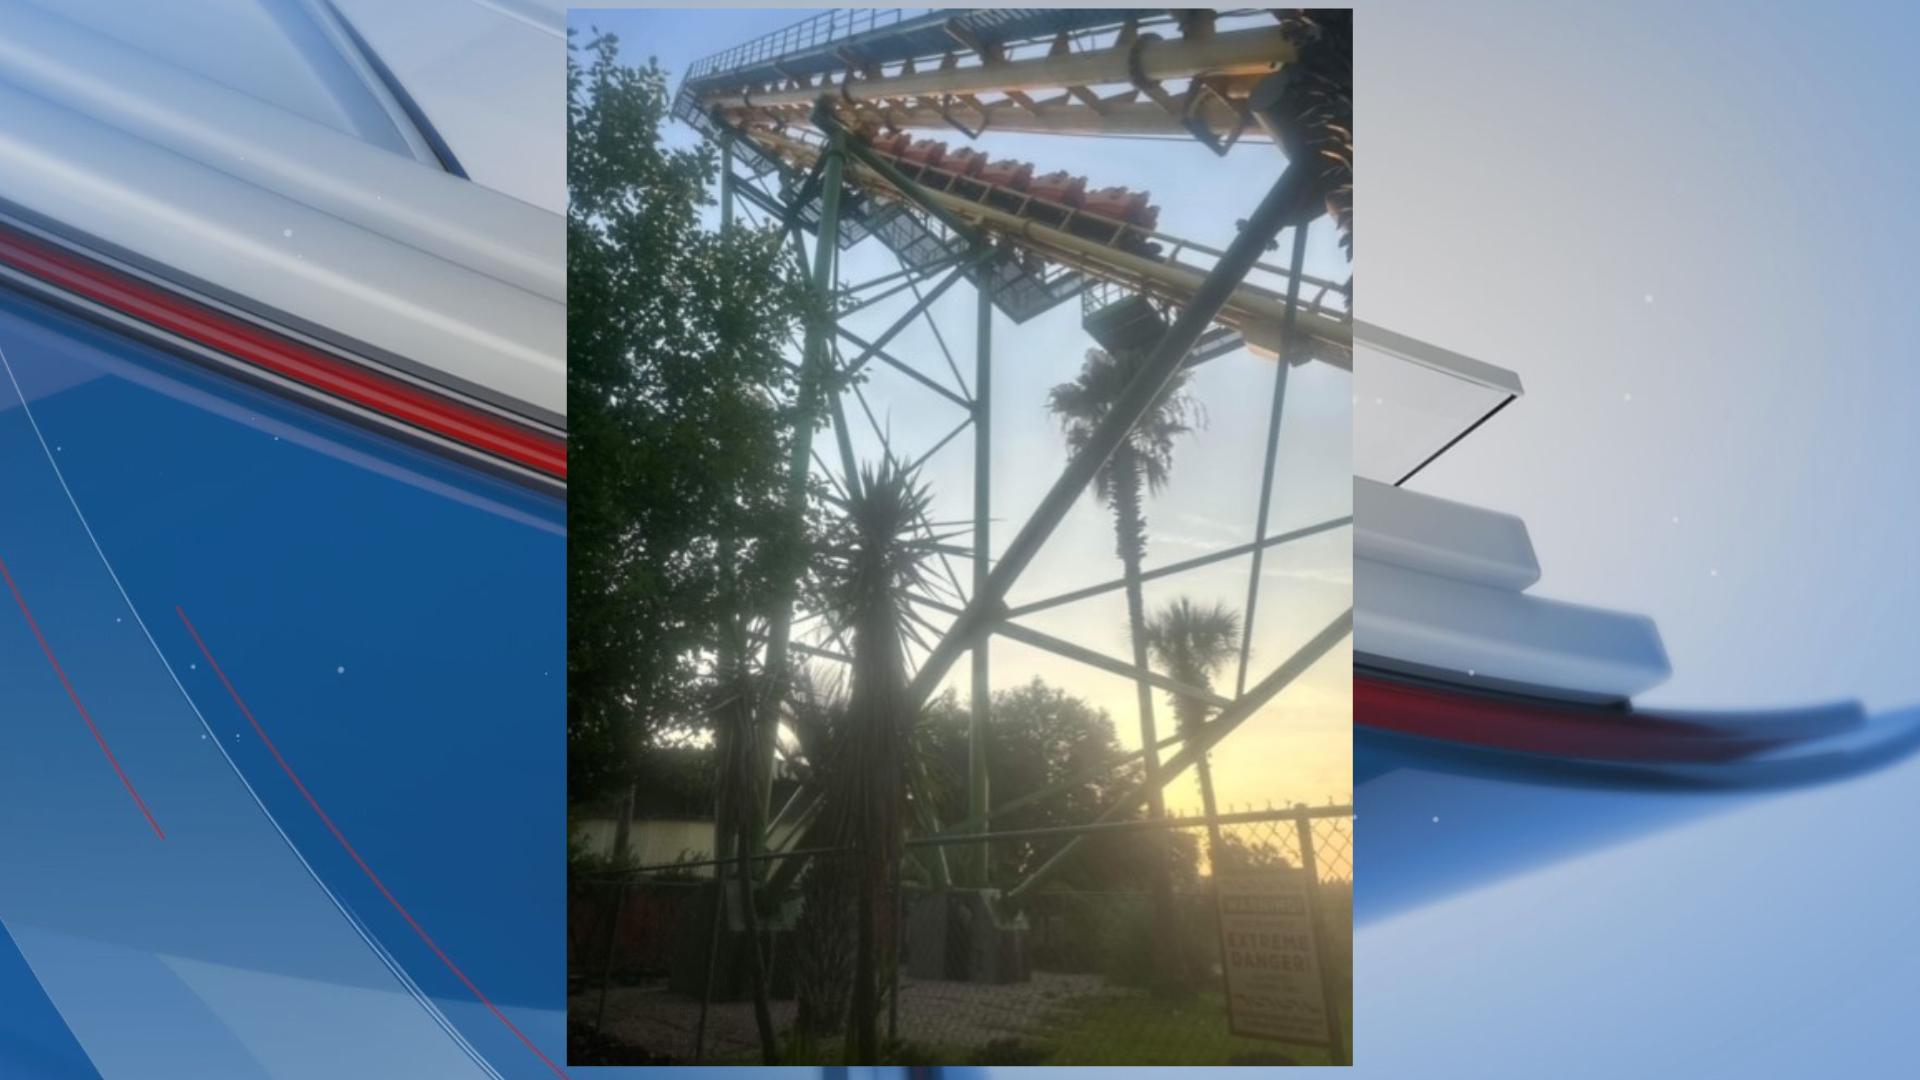 Roller coaster connects to track mid-ride. Watch